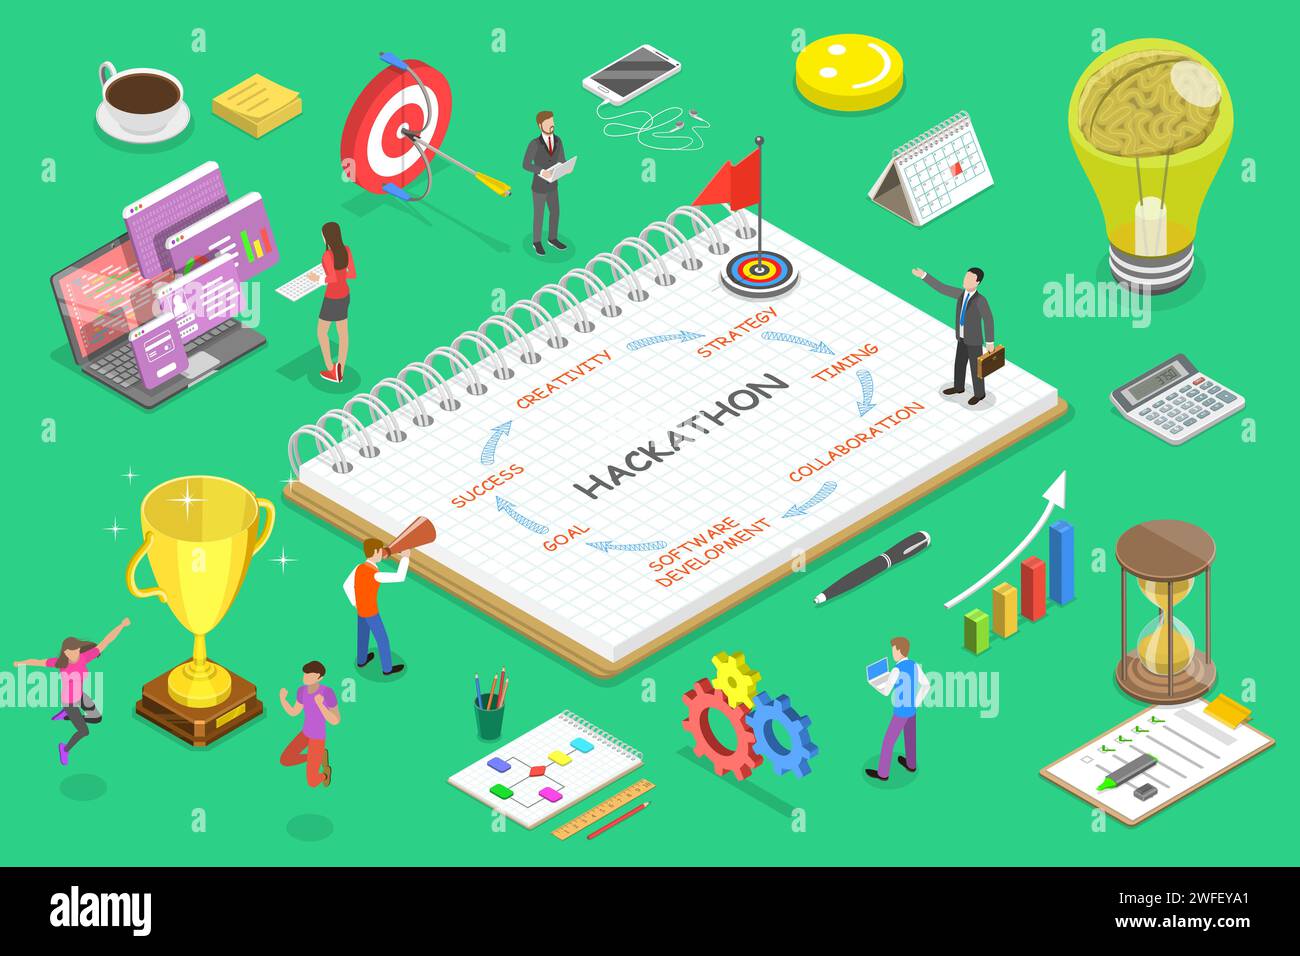 Isometric flat vector concept of parts of hackathon which are creativity, strategy, timing, collaboration, software development, goal, success. Stock Vector